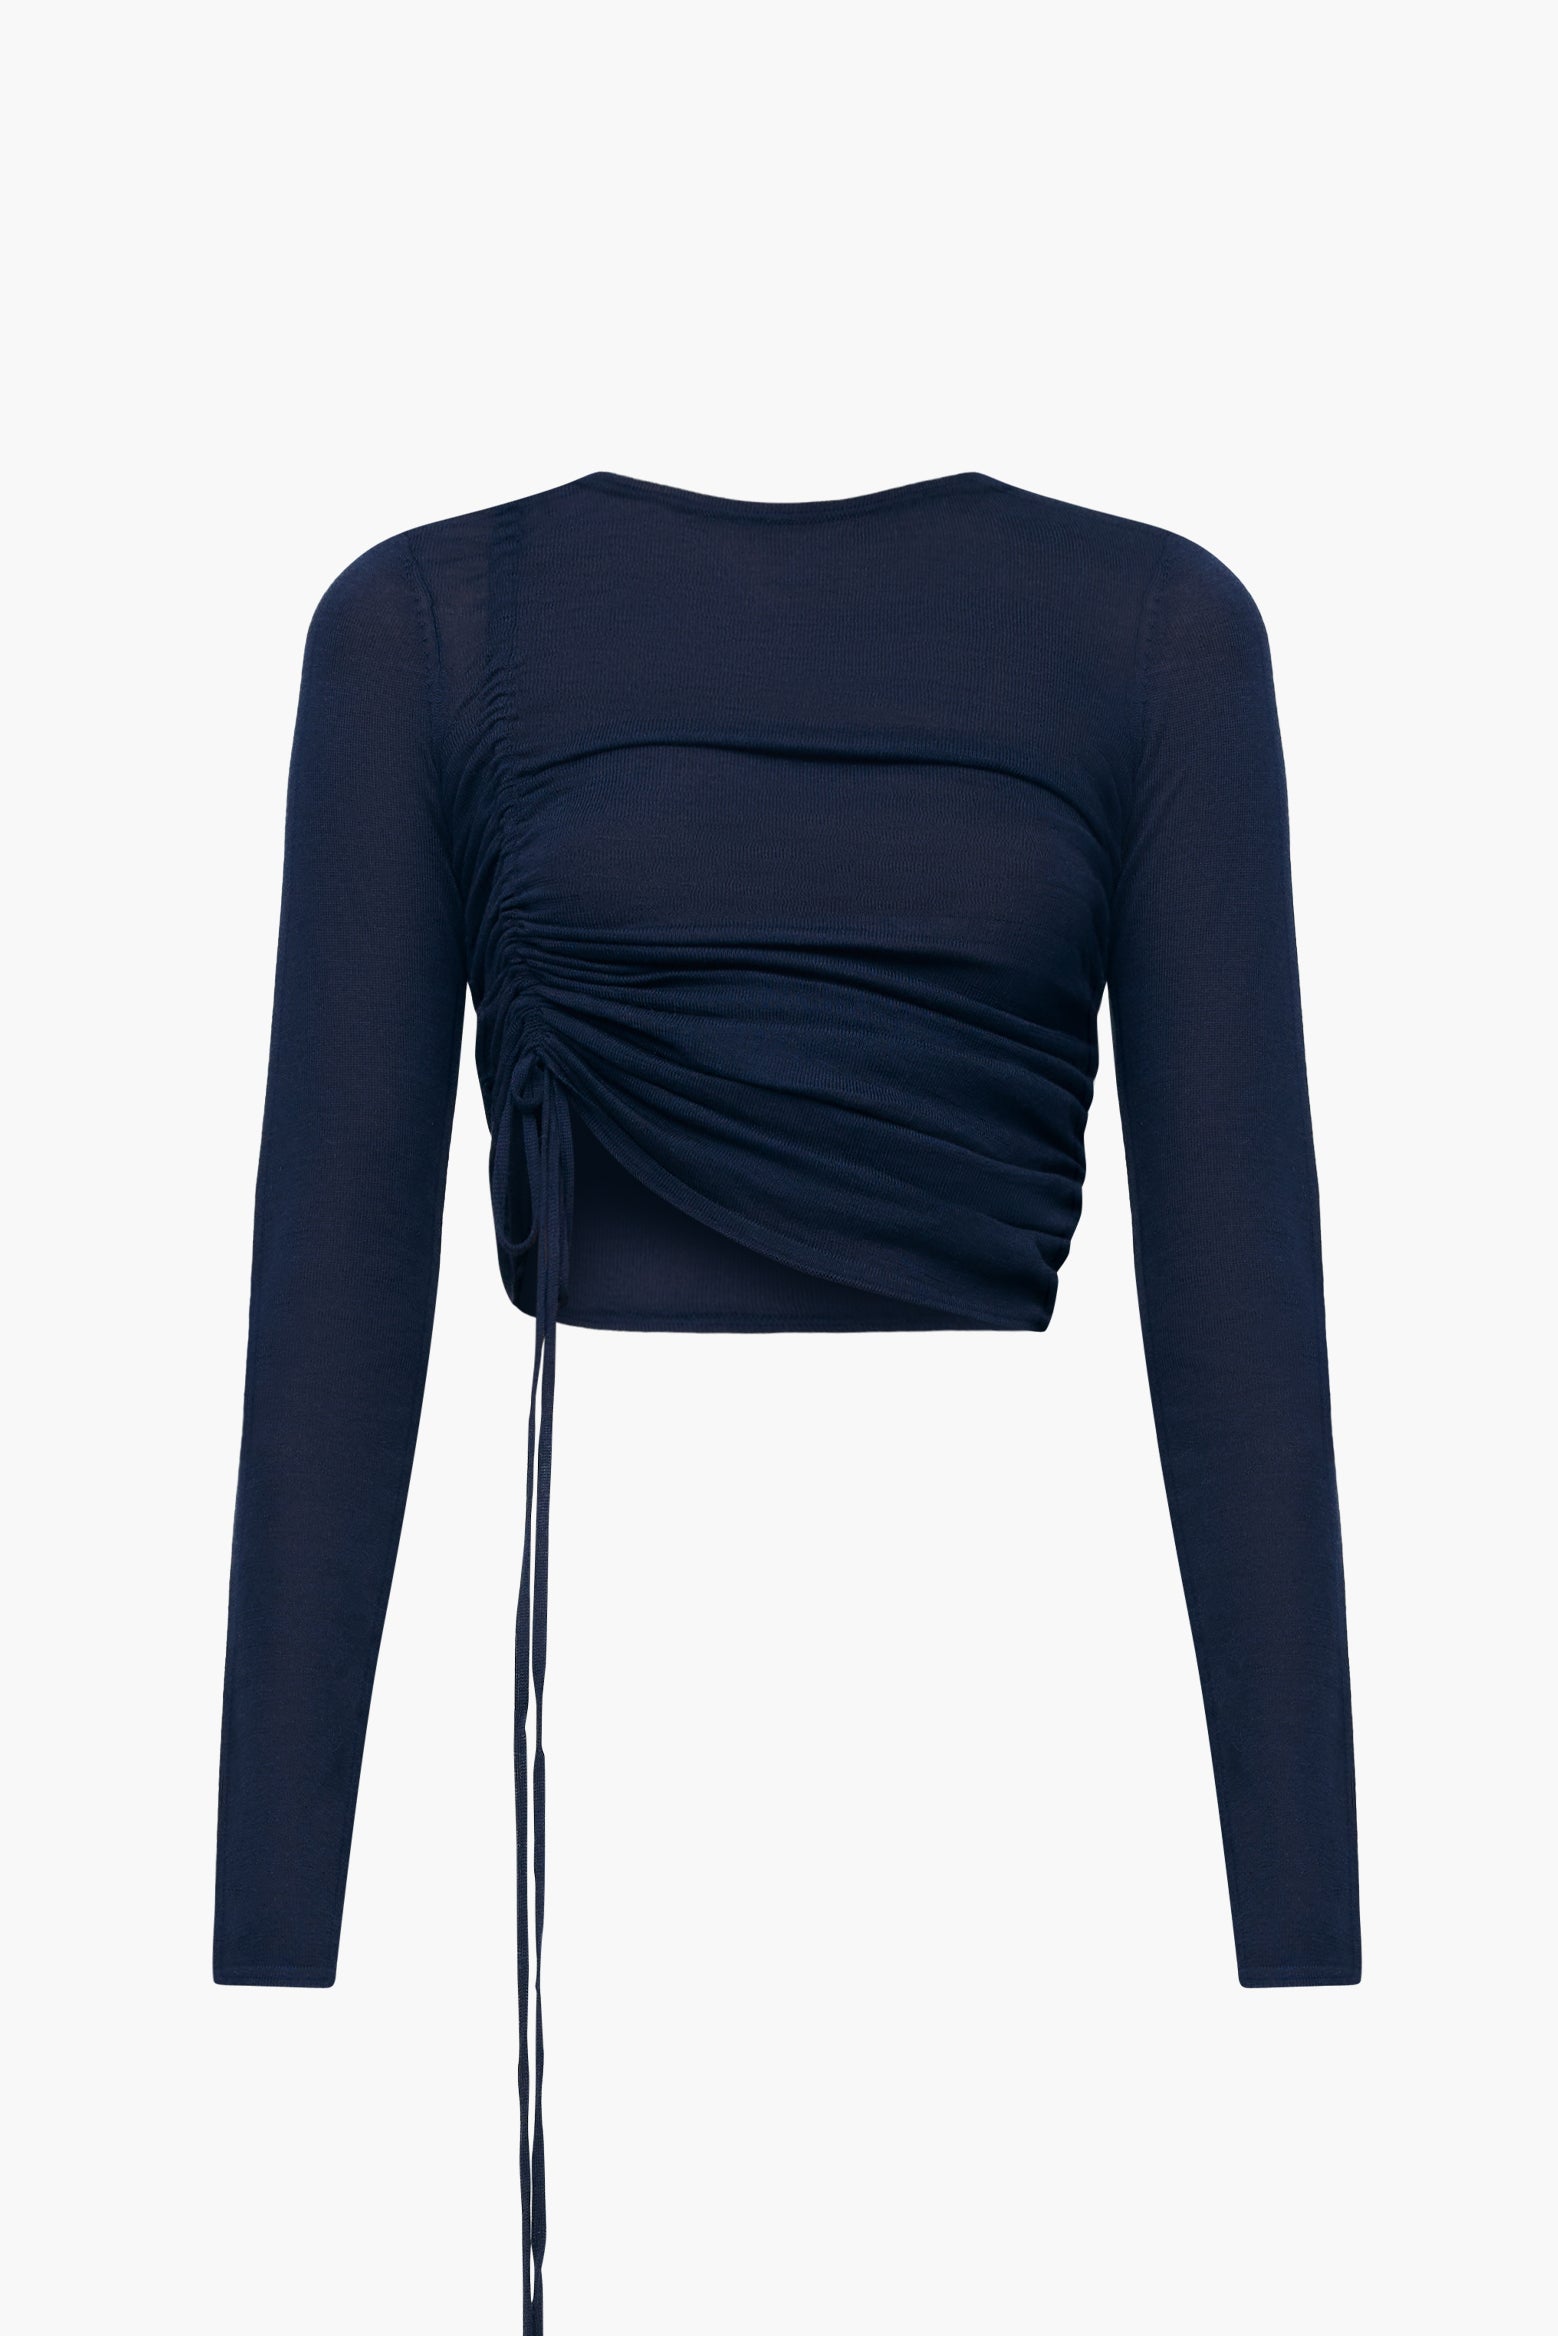 Wynn Hamlyn Nadine Knit L/S Top in Navy available at The New Trend Australia.